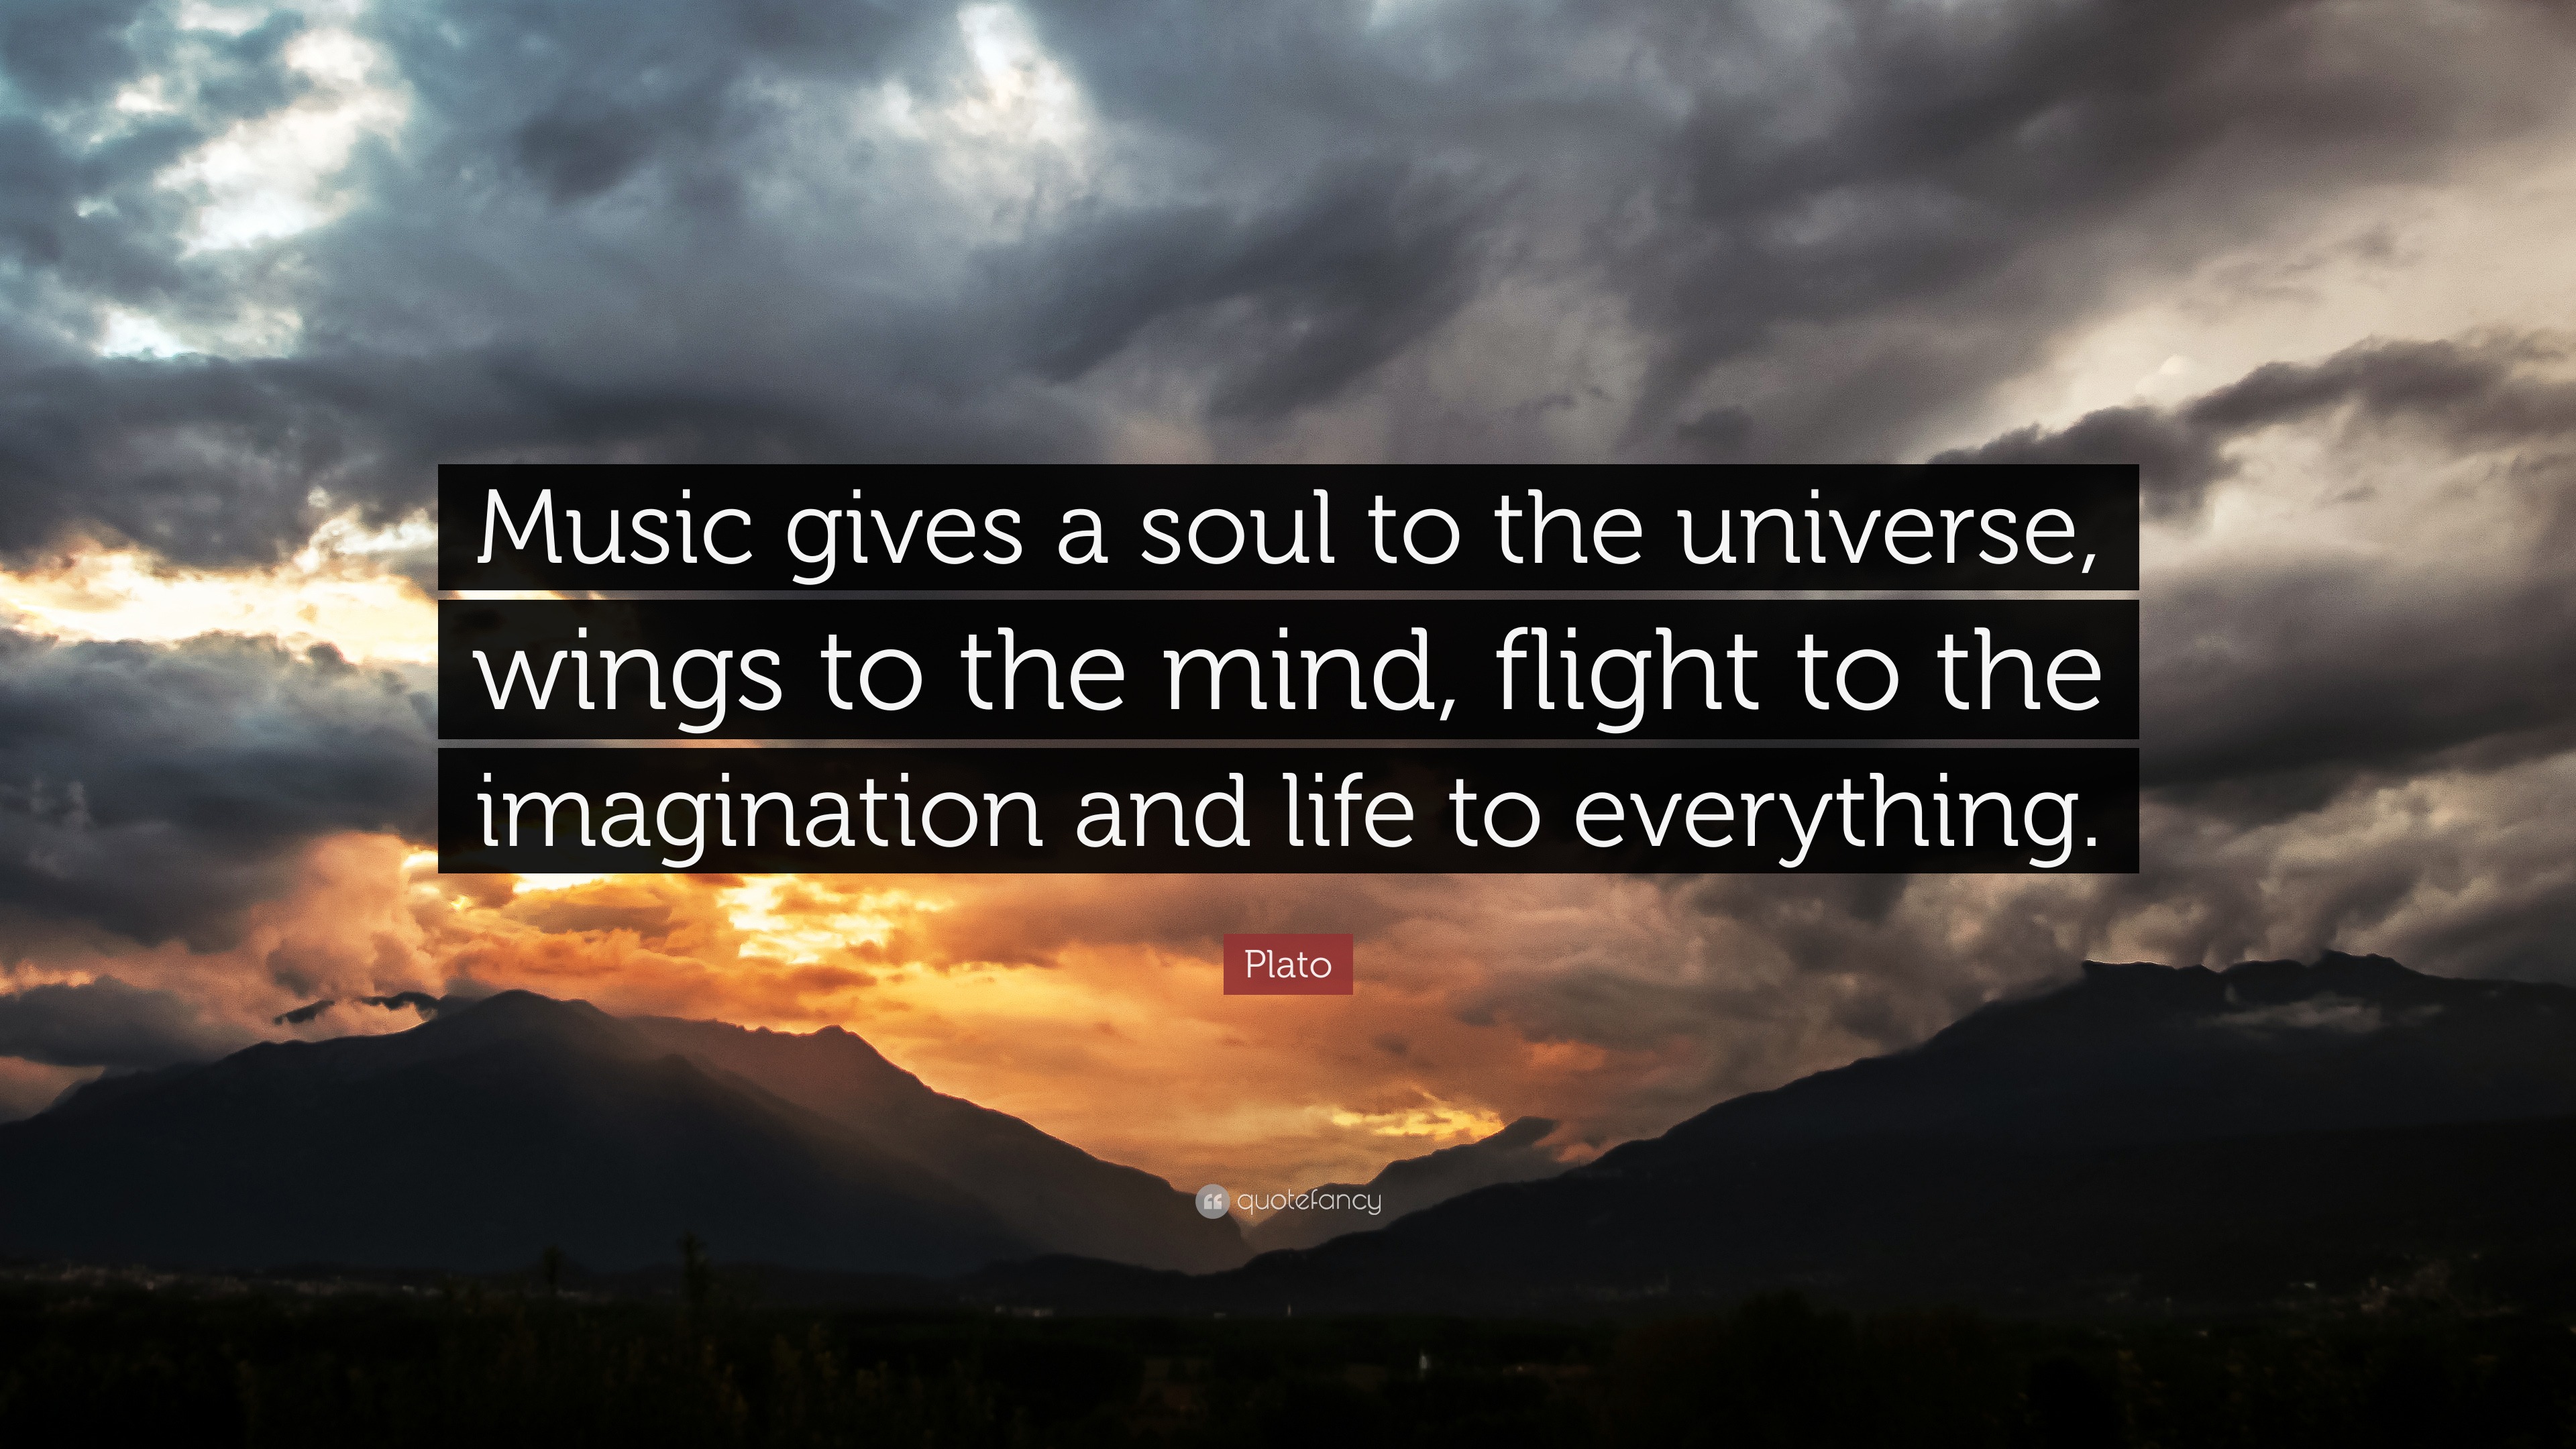 Plato Quote: “Music gives a soul to the universe, wings to the mind